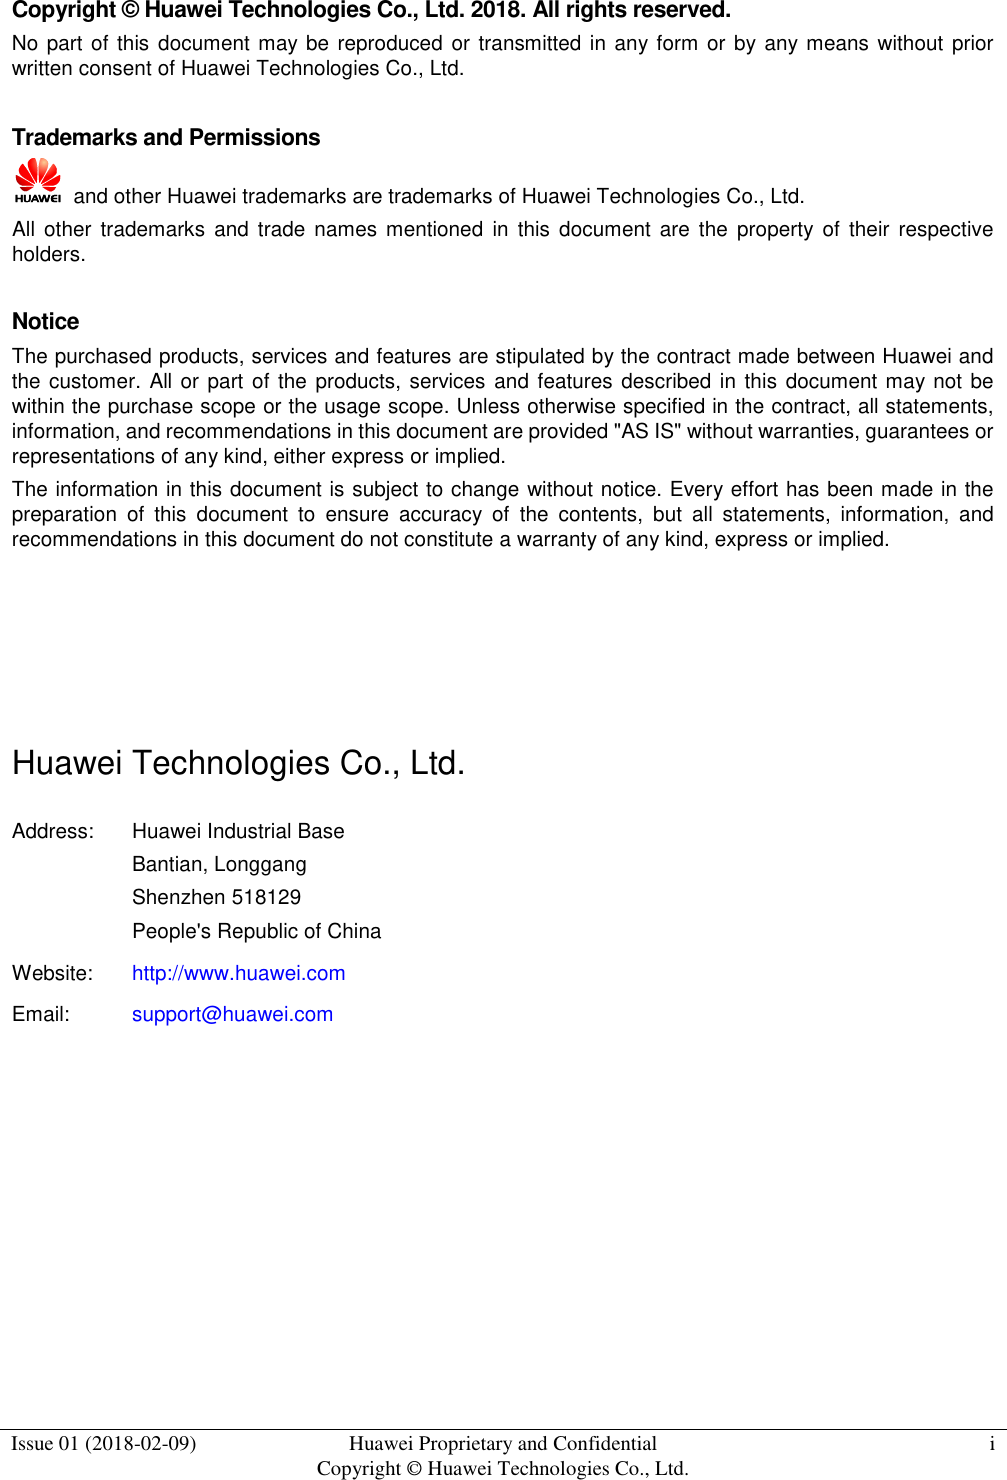  Issue 01 (2018-02-09)  Huawei Proprietary and Confidential                                     Copyright © Huawei Technologies Co., Ltd. i  Copyright © Huawei Technologies Co., Ltd. 2018. All rights reserved. No  part  of  this  document  may  be  reproduced  or  transmitted in  any  form  or  by  any means  without  prior written consent of Huawei Technologies Co., Ltd.  Trademarks and Permissions   and other Huawei trademarks are trademarks of Huawei Technologies Co., Ltd. All  other  trademarks  and  trade  names  mentioned  in  this  document  are  the  property  of  their  respective holders.  Notice The purchased products, services and features are stipulated by the contract made between Huawei and the  customer.  All or part of  the  products,  services  and  features  described  in  this  document may not be within the purchase scope or the usage scope. Unless otherwise specified in the contract, all statements, information, and recommendations in this document are provided &quot;AS IS&quot; without warranties, guarantees or representations of any kind, either express or implied. The information in this document is subject to change without notice. Every effort has been made in the preparation  of  this  document  to  ensure  accuracy  of  the  contents,  but  all  statements,  information,  and recommendations in this document do not constitute a warranty of any kind, express or implied.     Huawei Technologies Co., Ltd. Address:  Huawei Industrial Base Bantian, Longgang Shenzhen 518129 People&apos;s Republic of China Website:  http://www.huawei.com Email:  support@huawei.com        